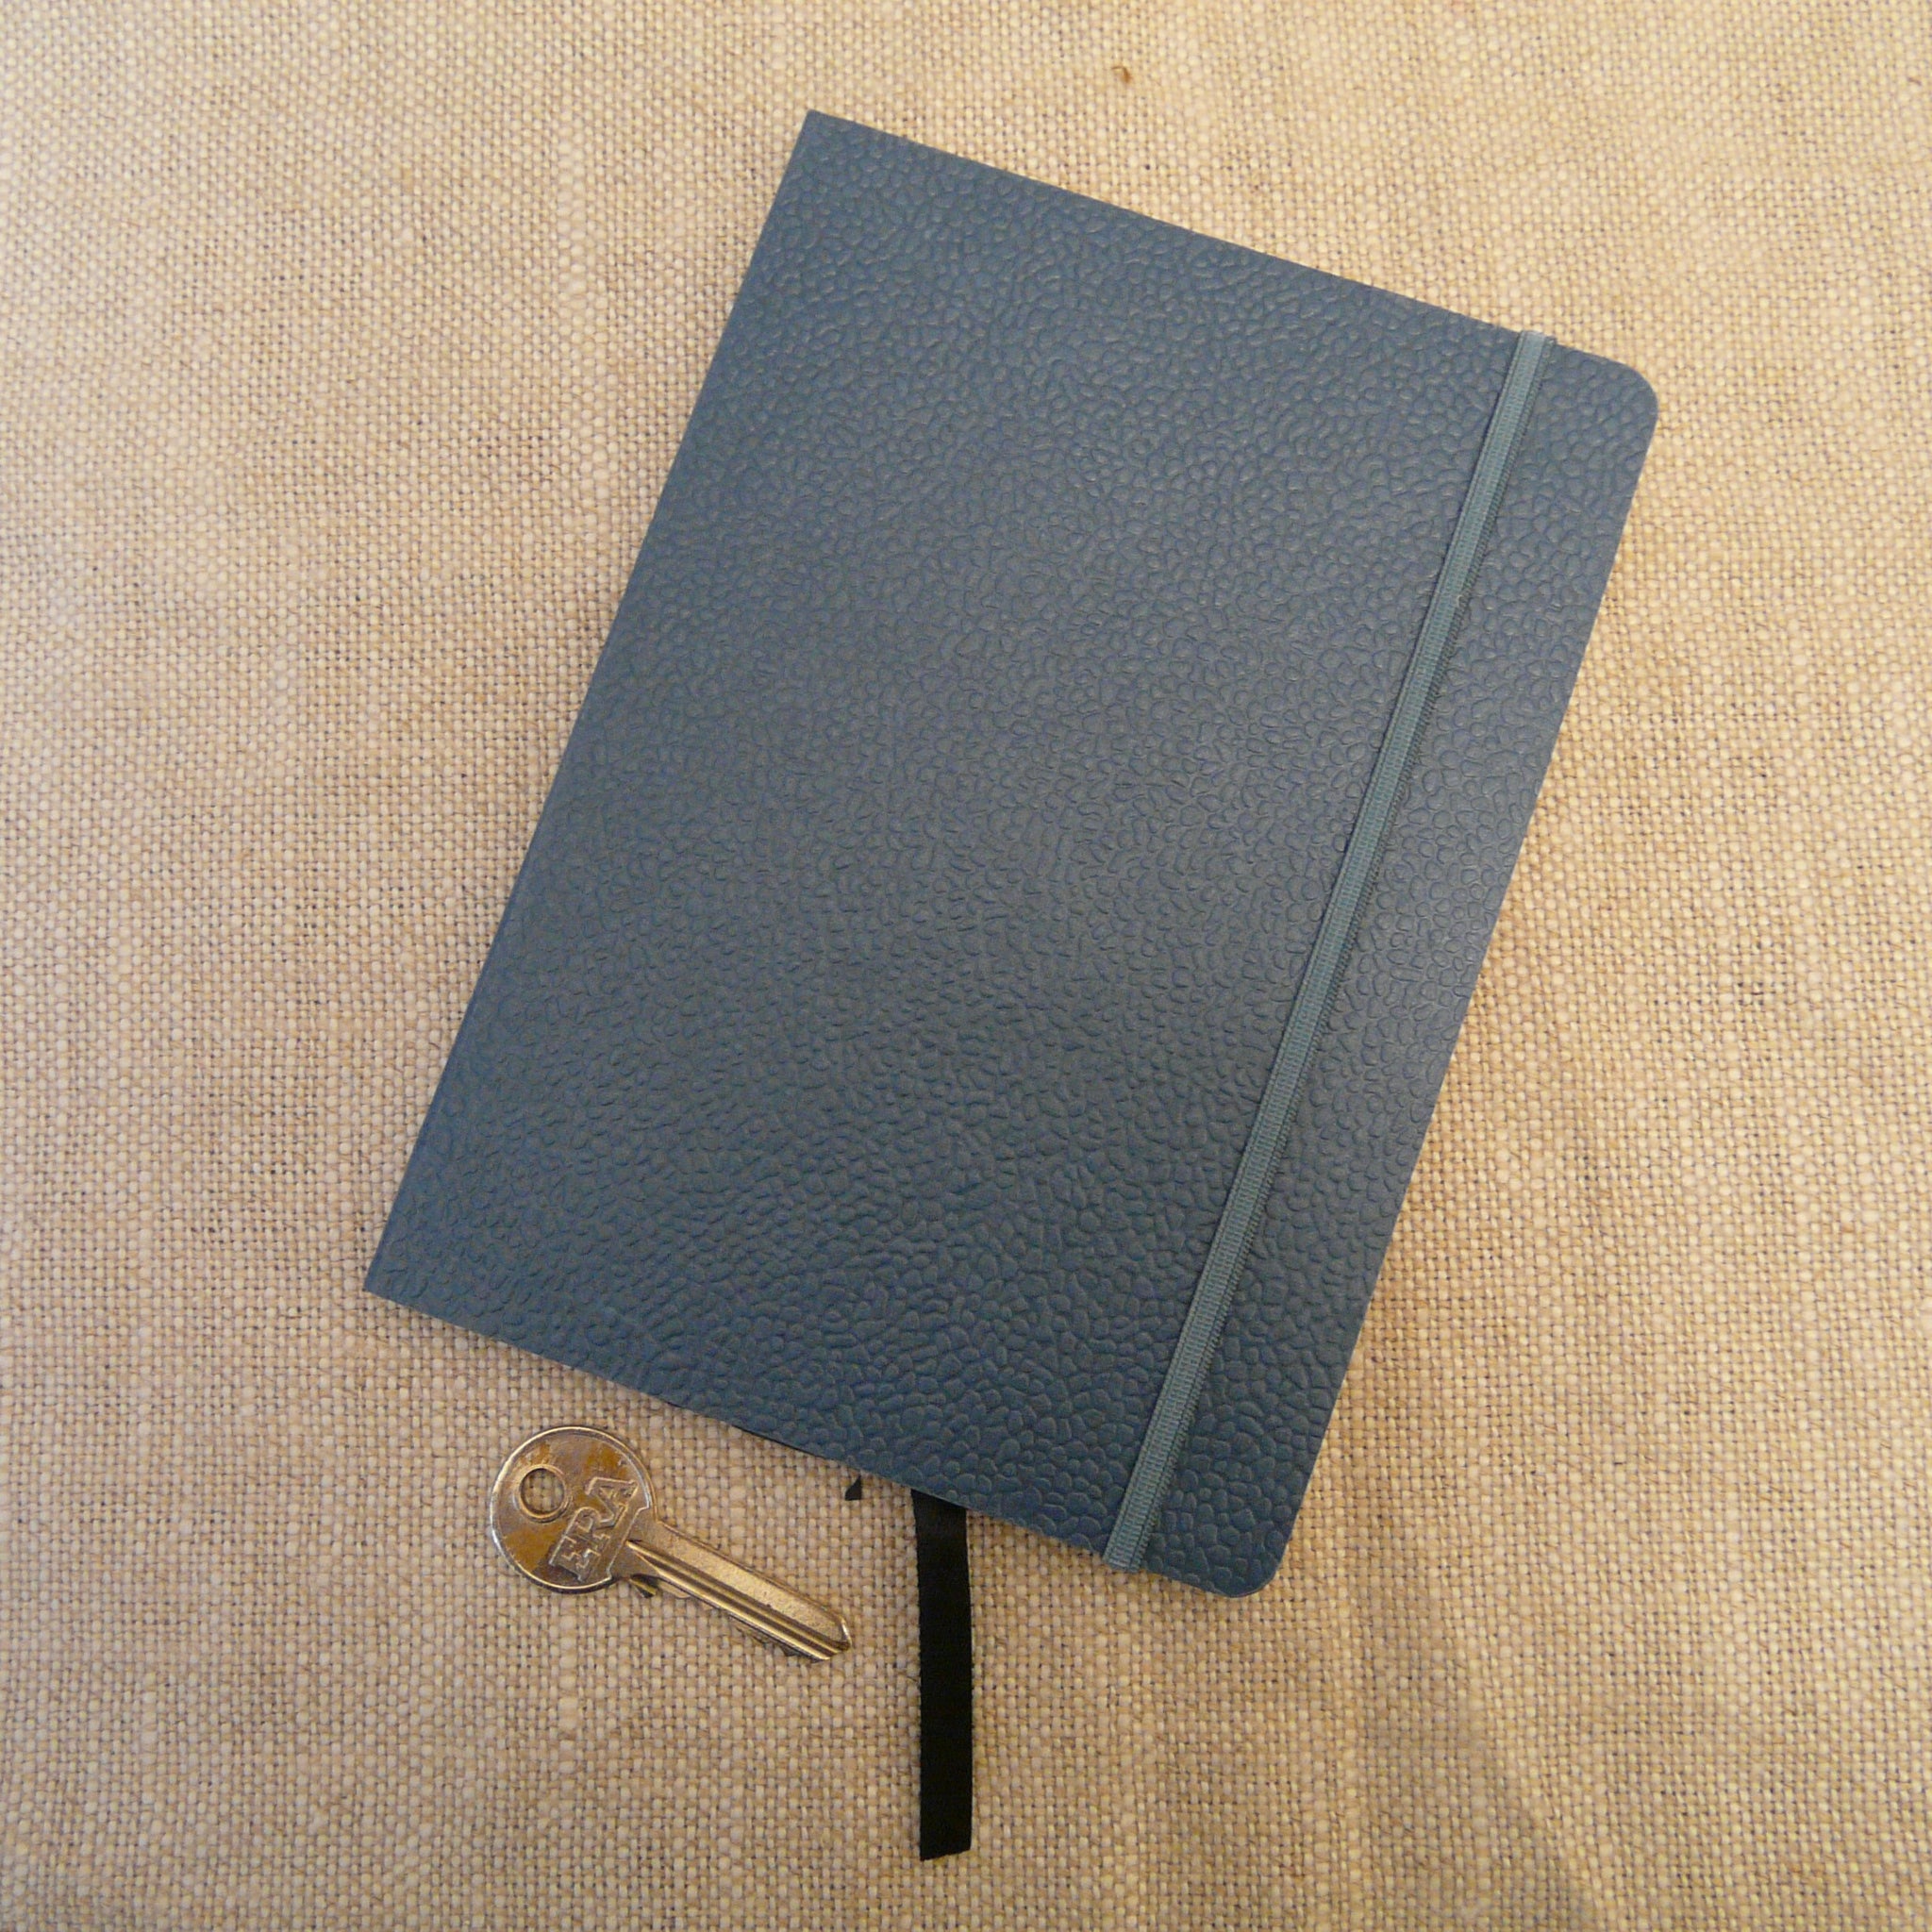 P1110331-Fair-trade-Handmade-paper-leather-look-notebook-journal-slate-blue-with-key 